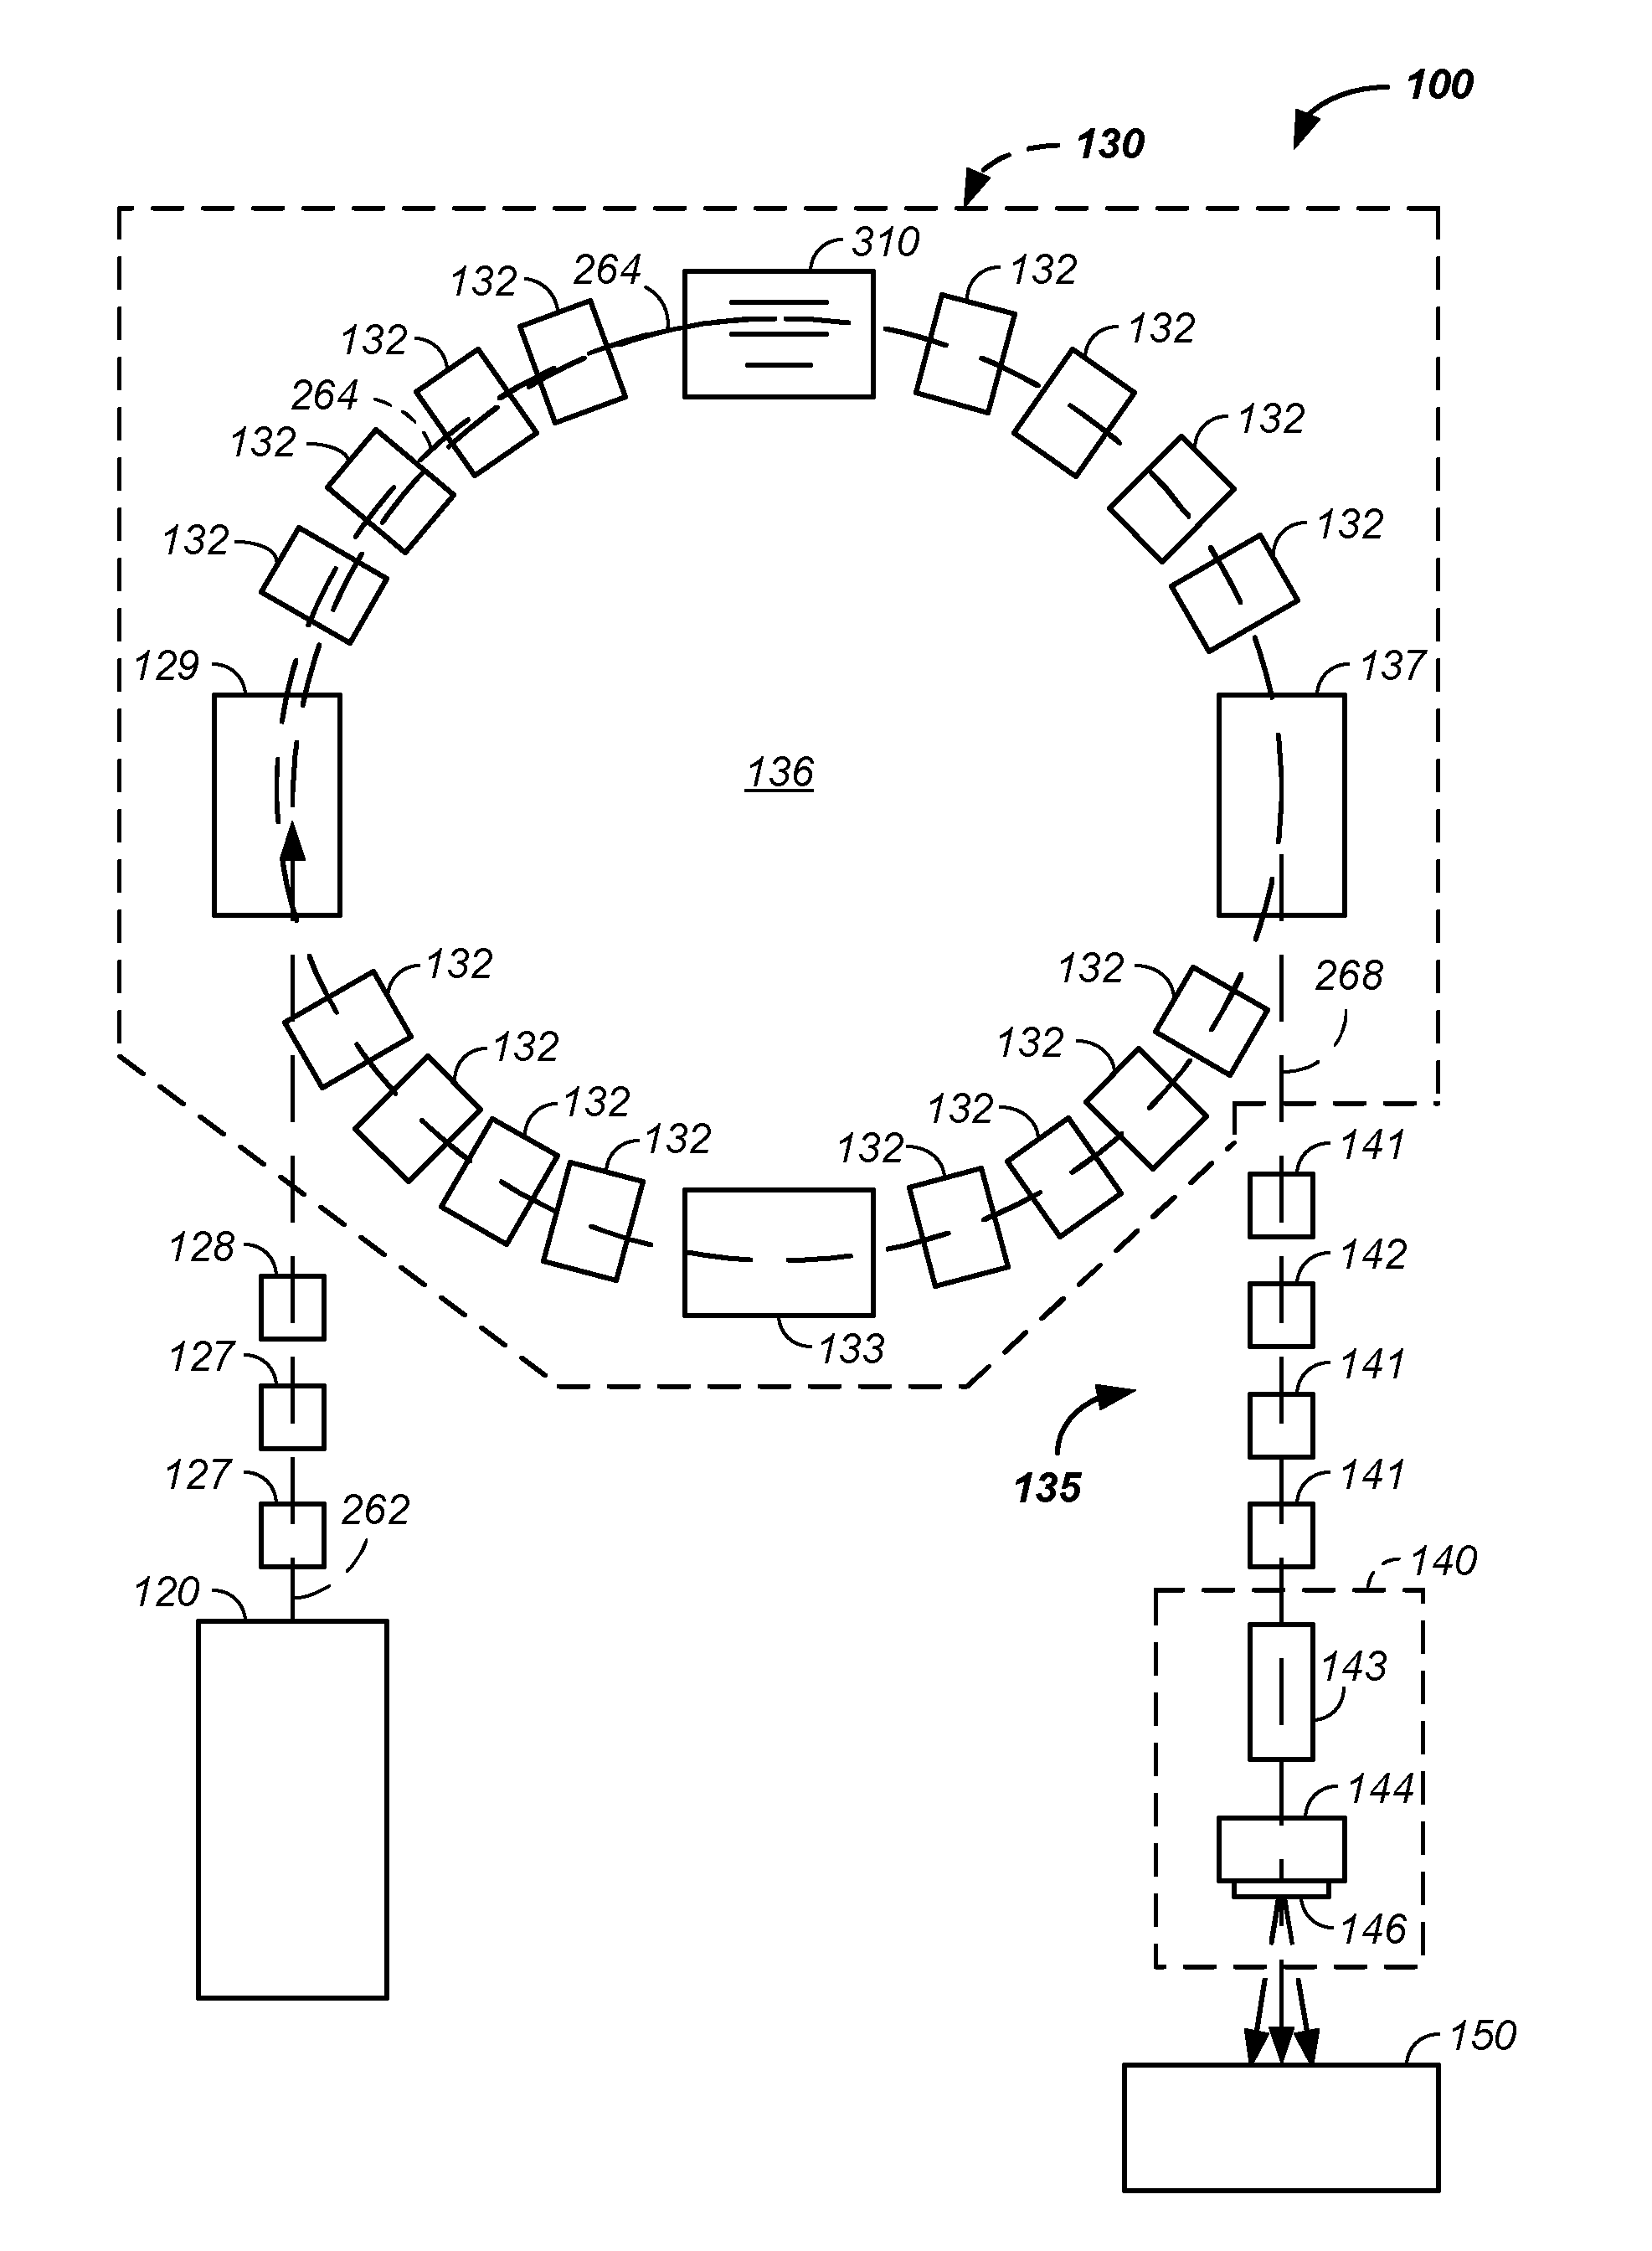 Hybrid charged particle / x-ray - imaging / treatment apparatus and method of use thereof